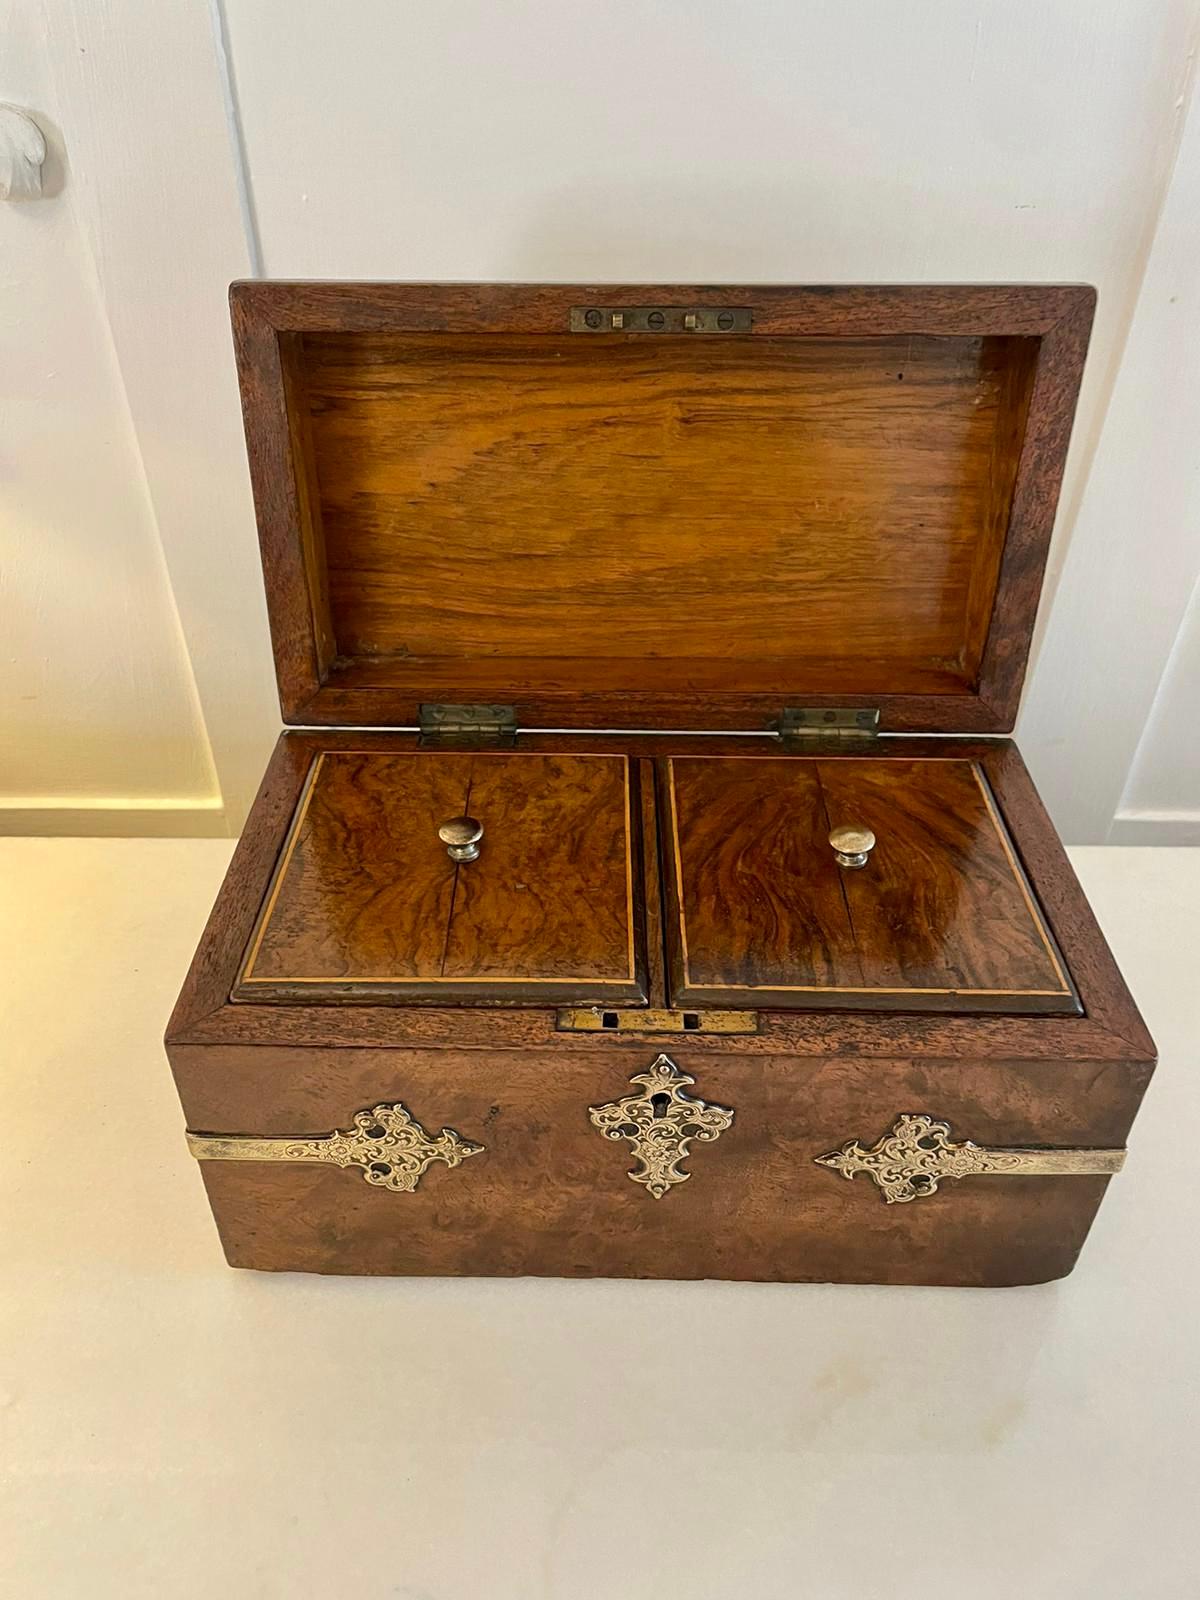 Superb Quality Antique Victorian Burr Walnut and Brass Mounted Tea Caddy For Sale 1